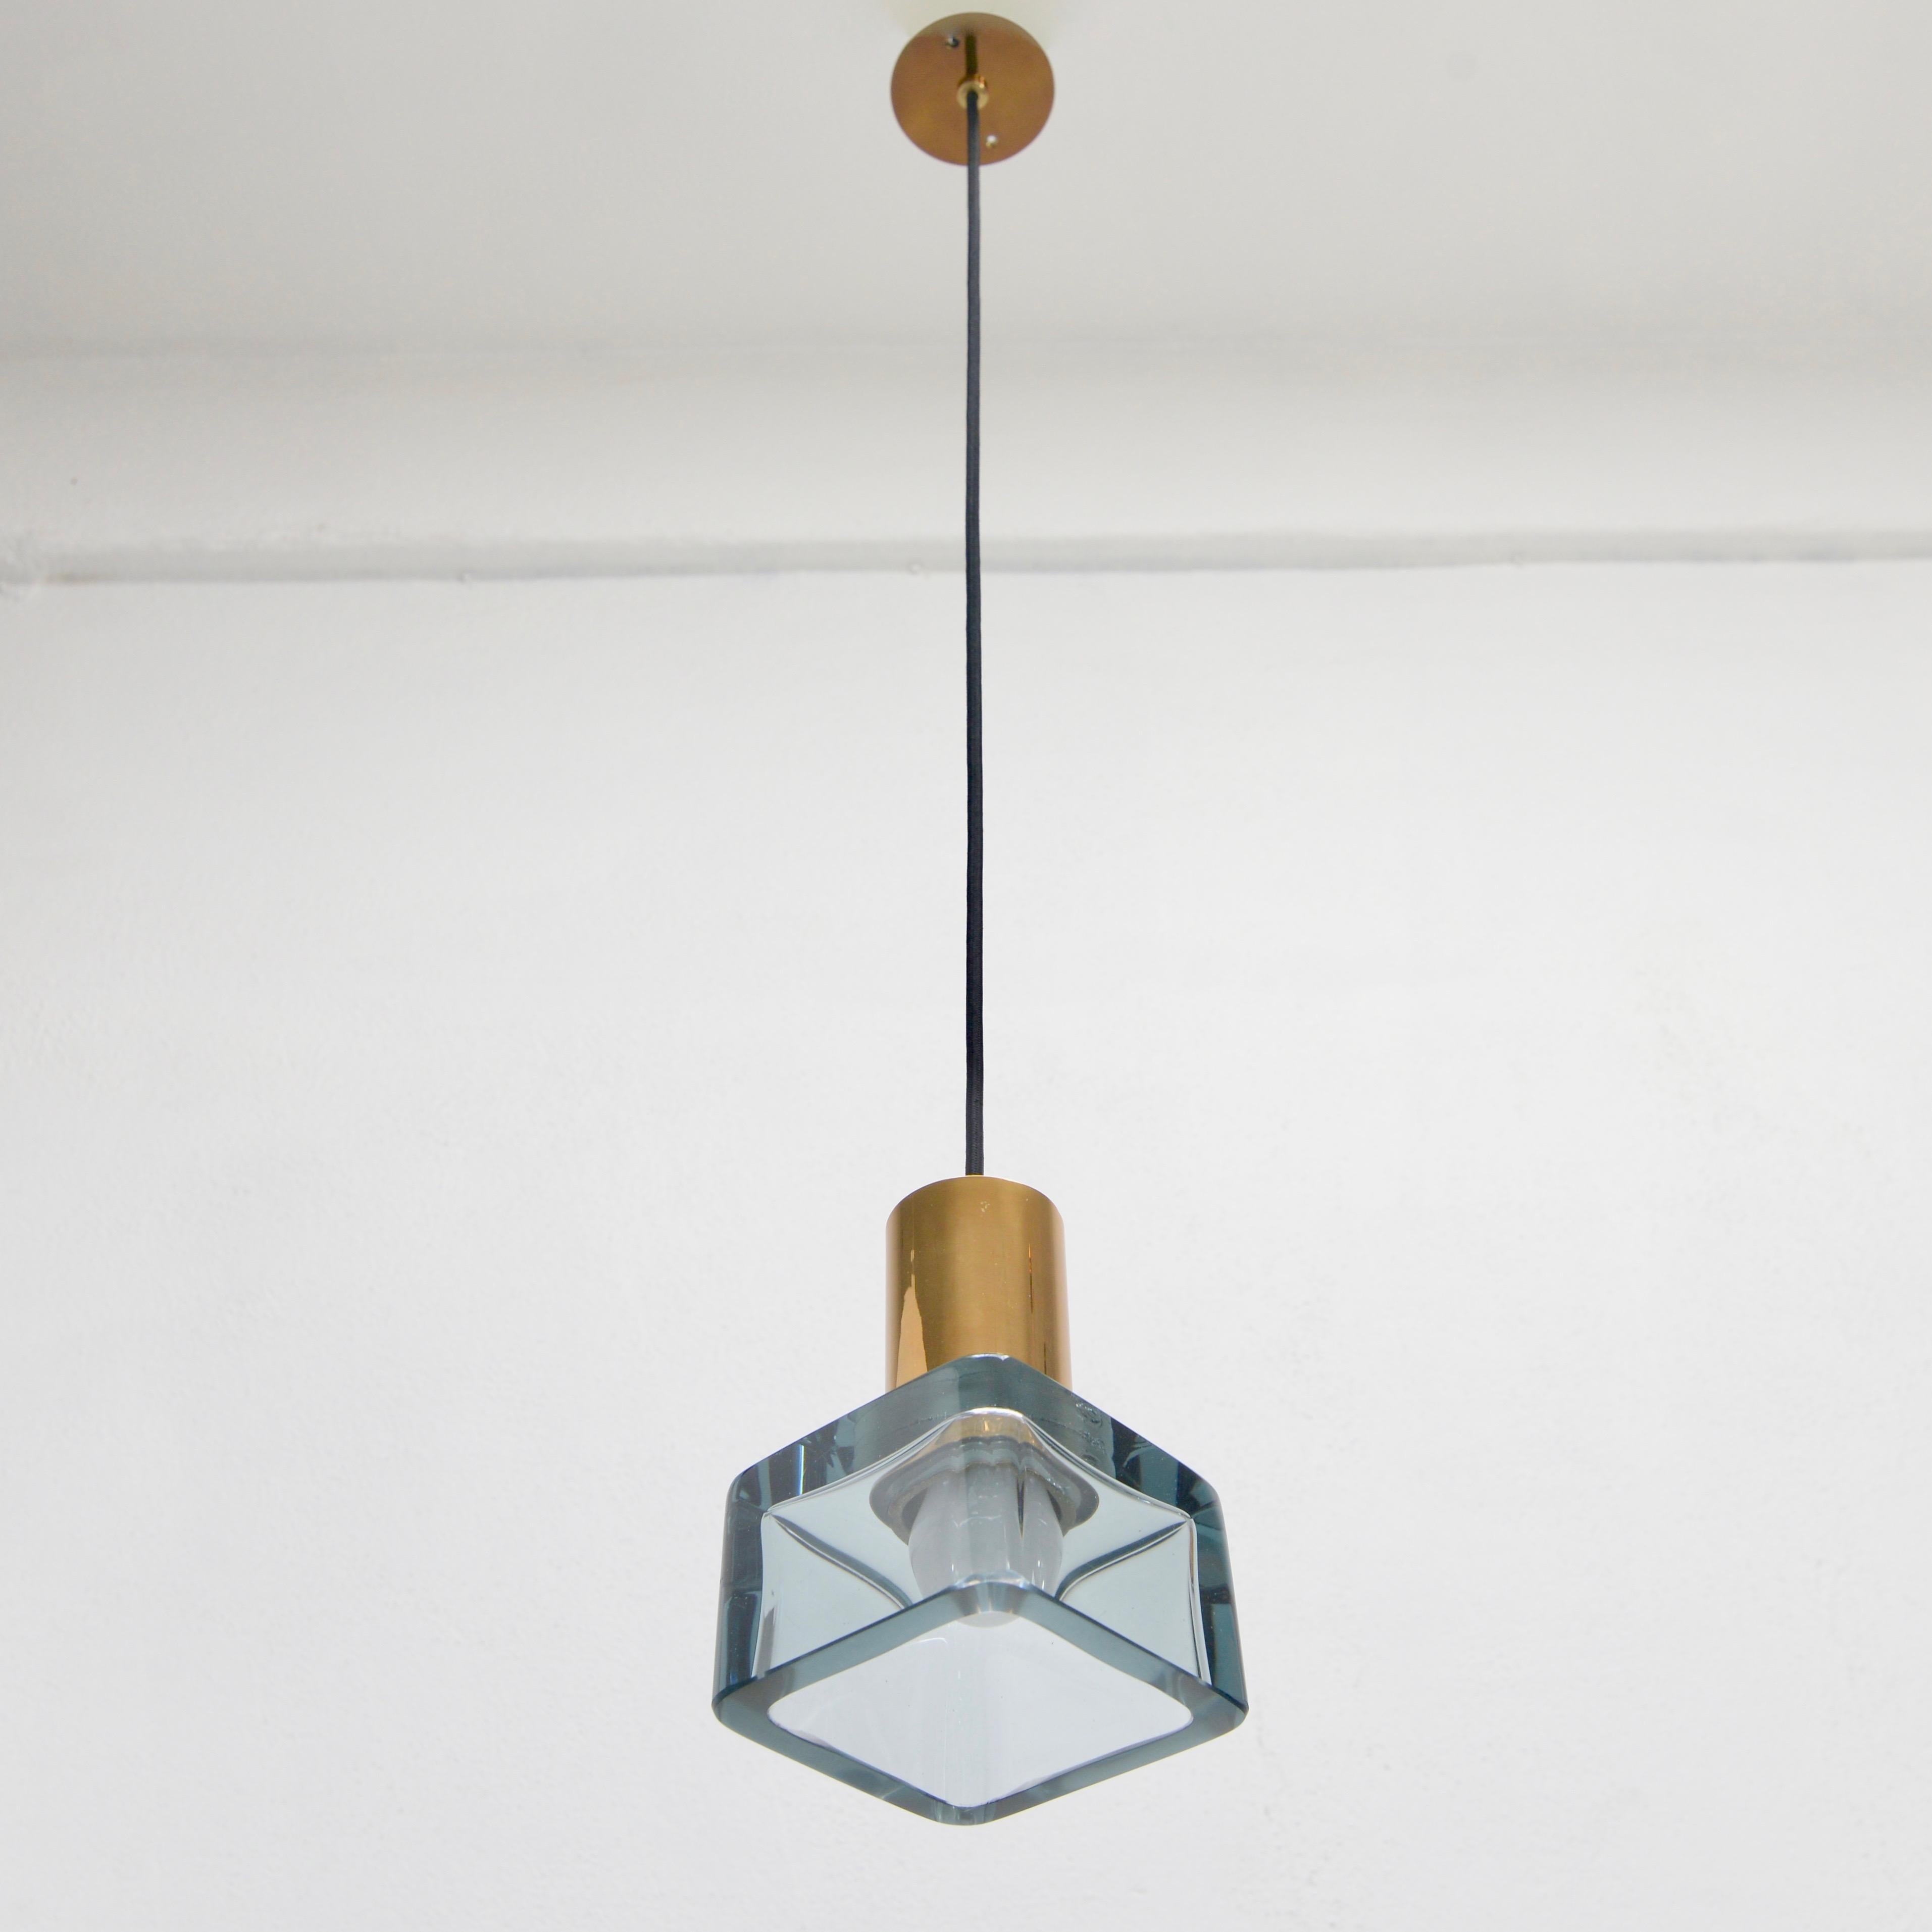 Wonderful classical Seguso pendant from 1960s Italy. In glass and aged brass. With a single E26 based socket. Wired for use in the US. Light bulb included with order.
Measurements:
OAD: 42”
Diameter 7.25”
Fixture height 8.25”.